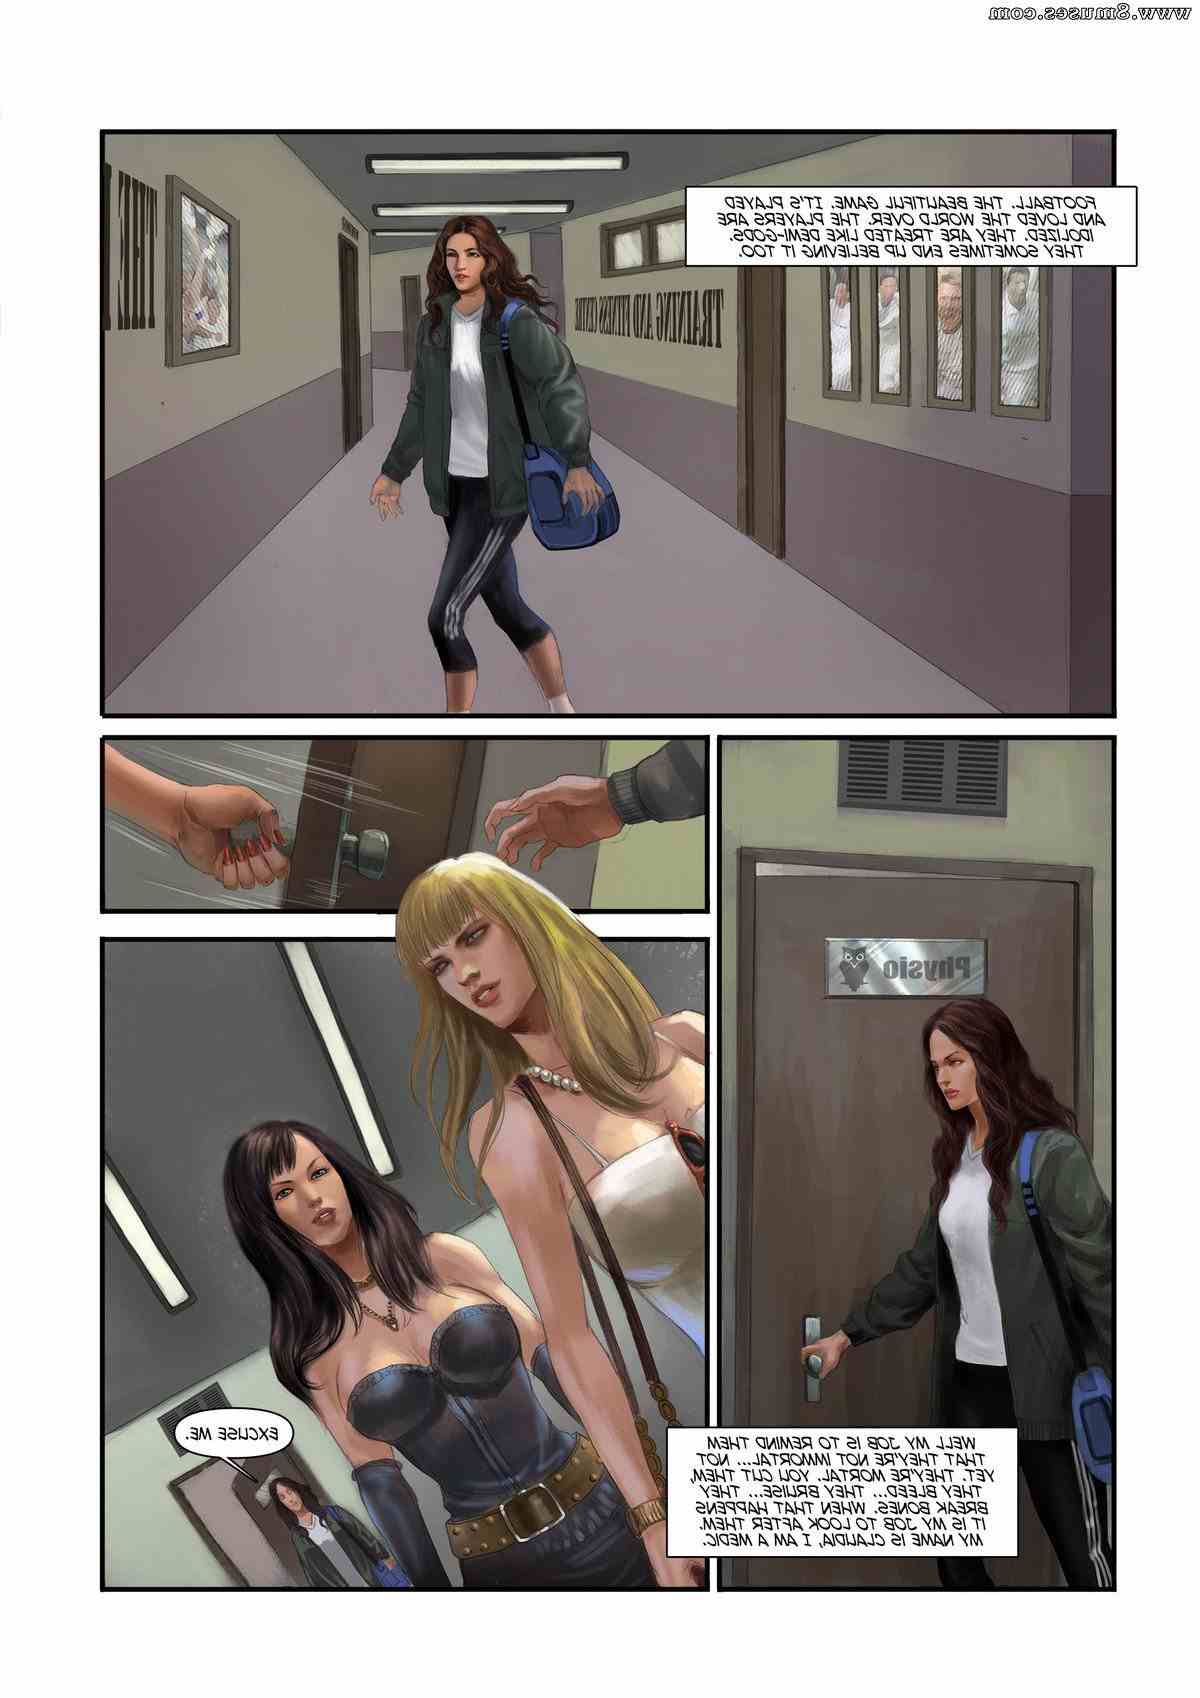 Expansionfan-Comics/The-BEautiful-Game The_BEautiful_Game__8muses_-_Sex_and_Porn_Comics_2.jpg